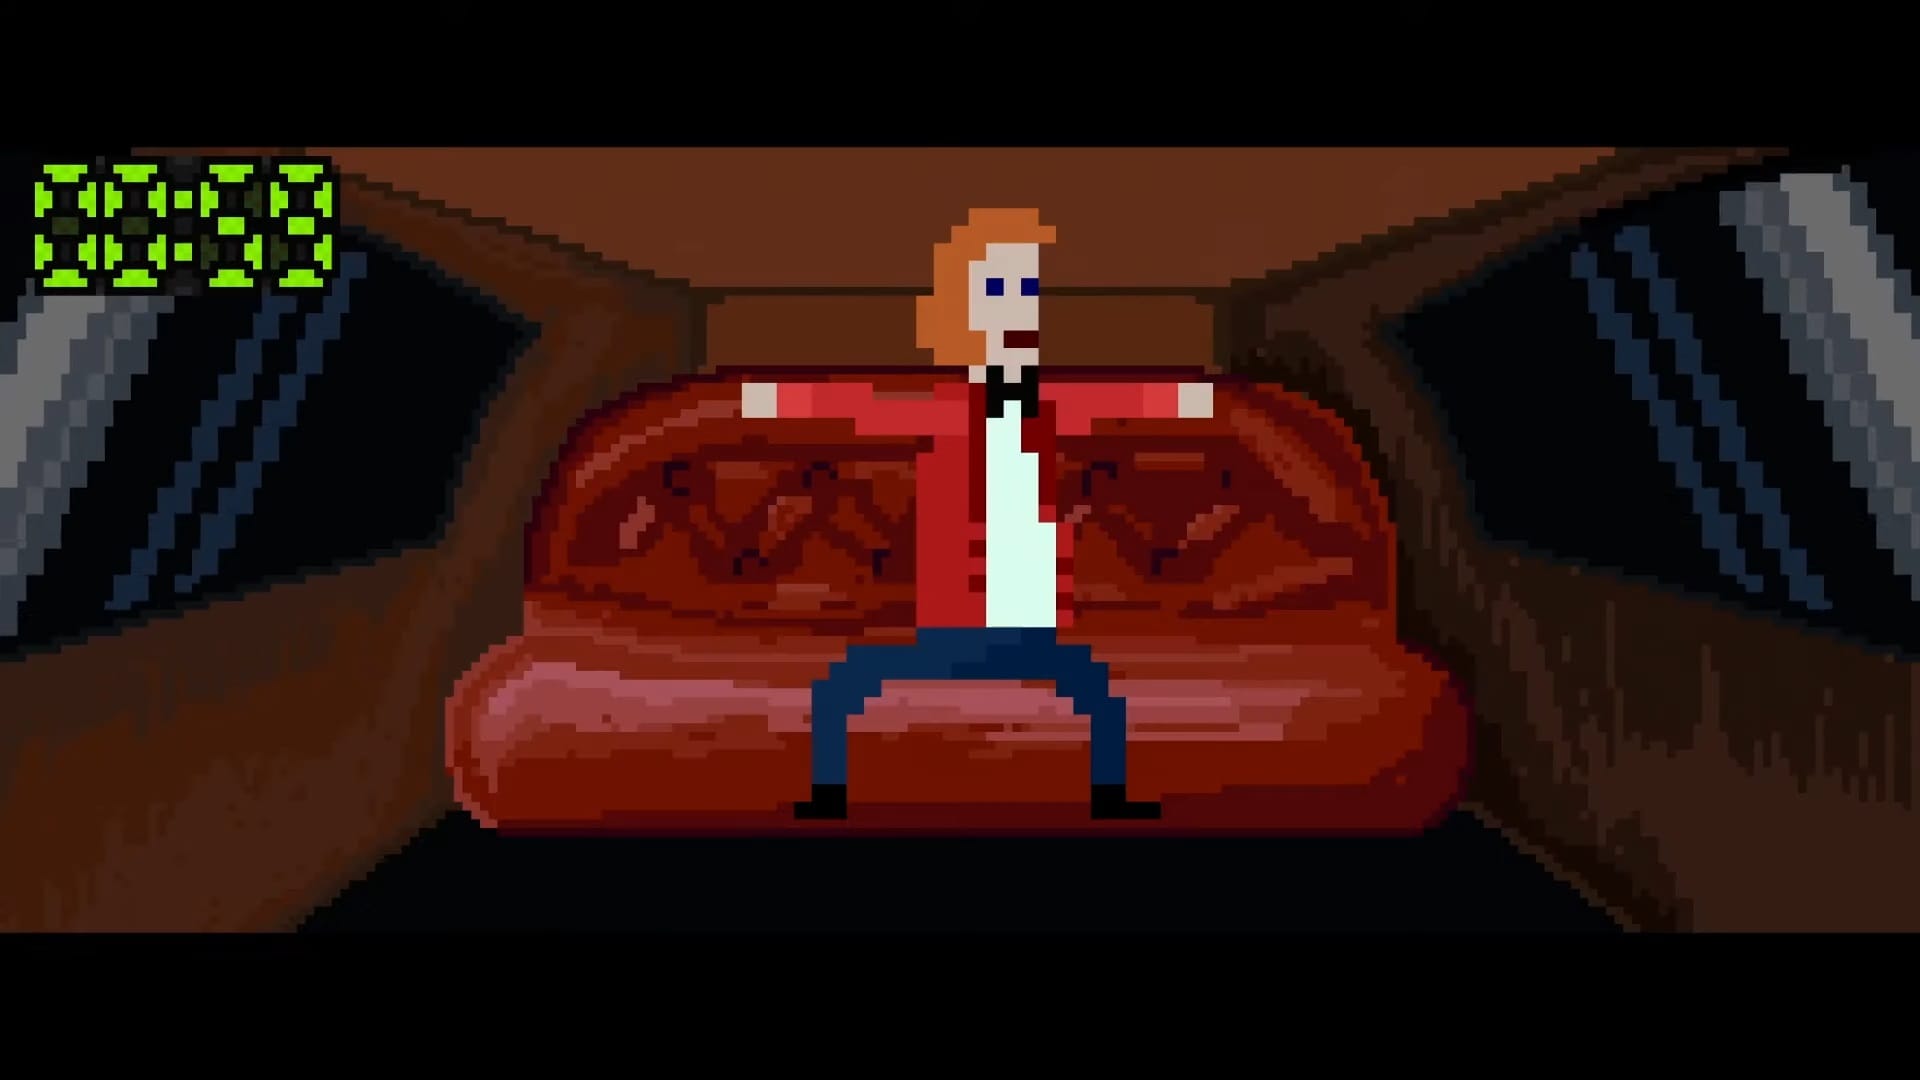 McPixel chills in a limo with his finest tux.